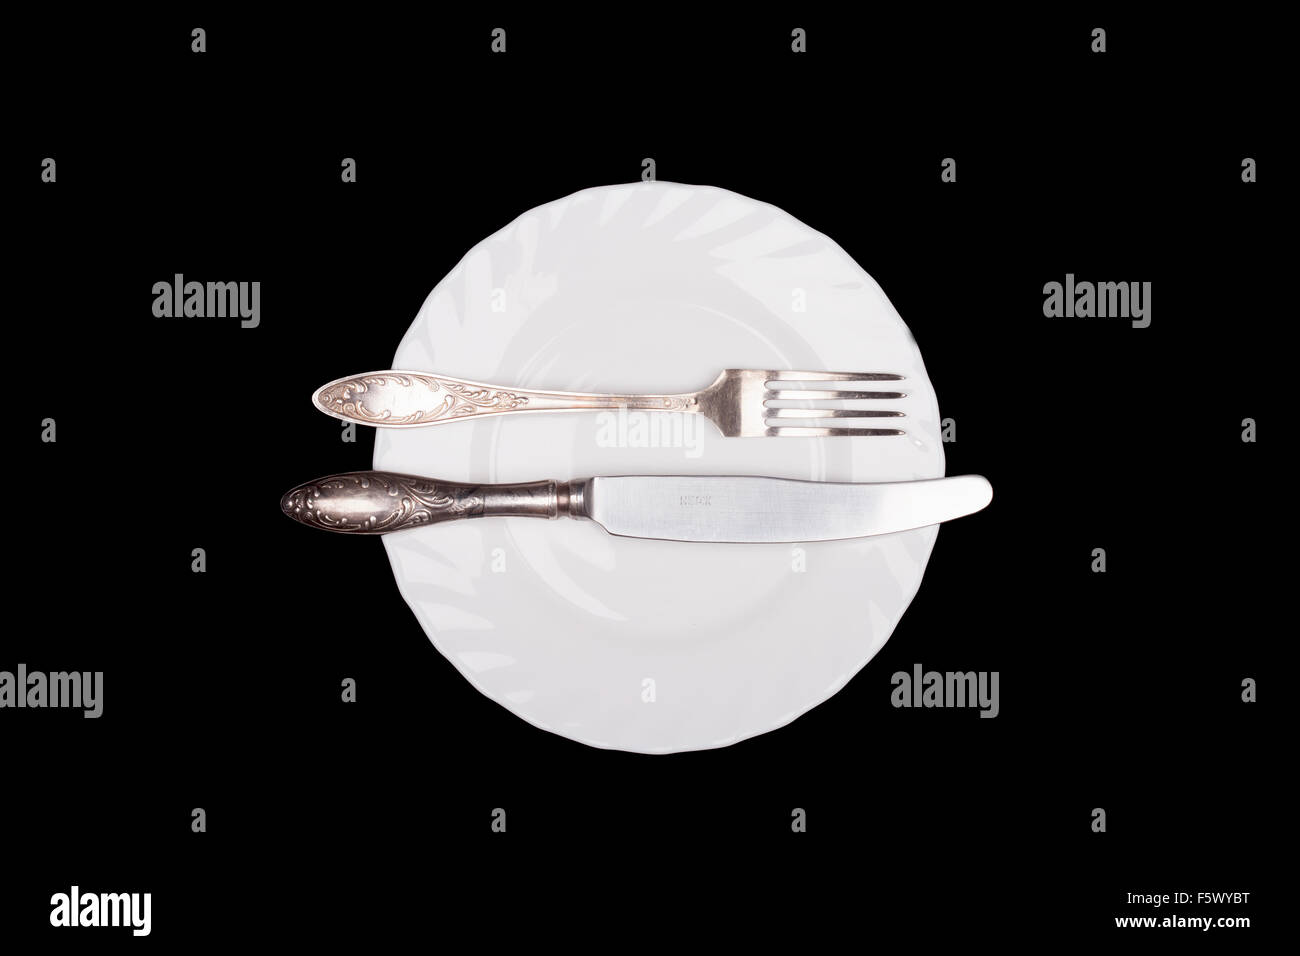 Etiquette sign. Plate, fork, knife top view isolated on black Stock Photo